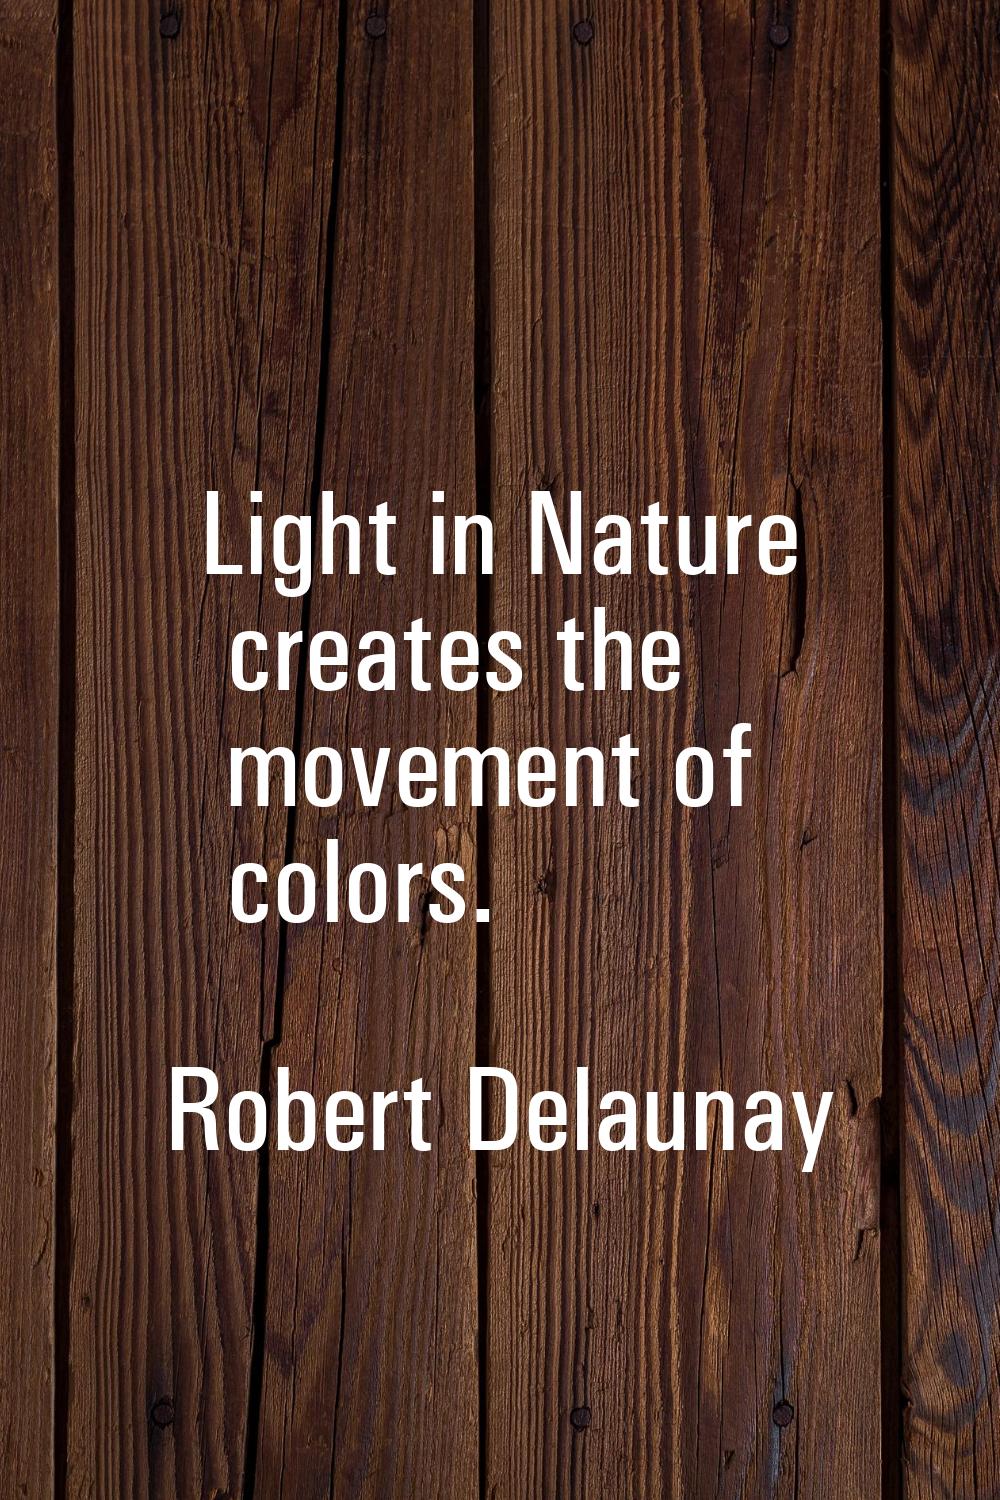 Light in Nature creates the movement of colors.